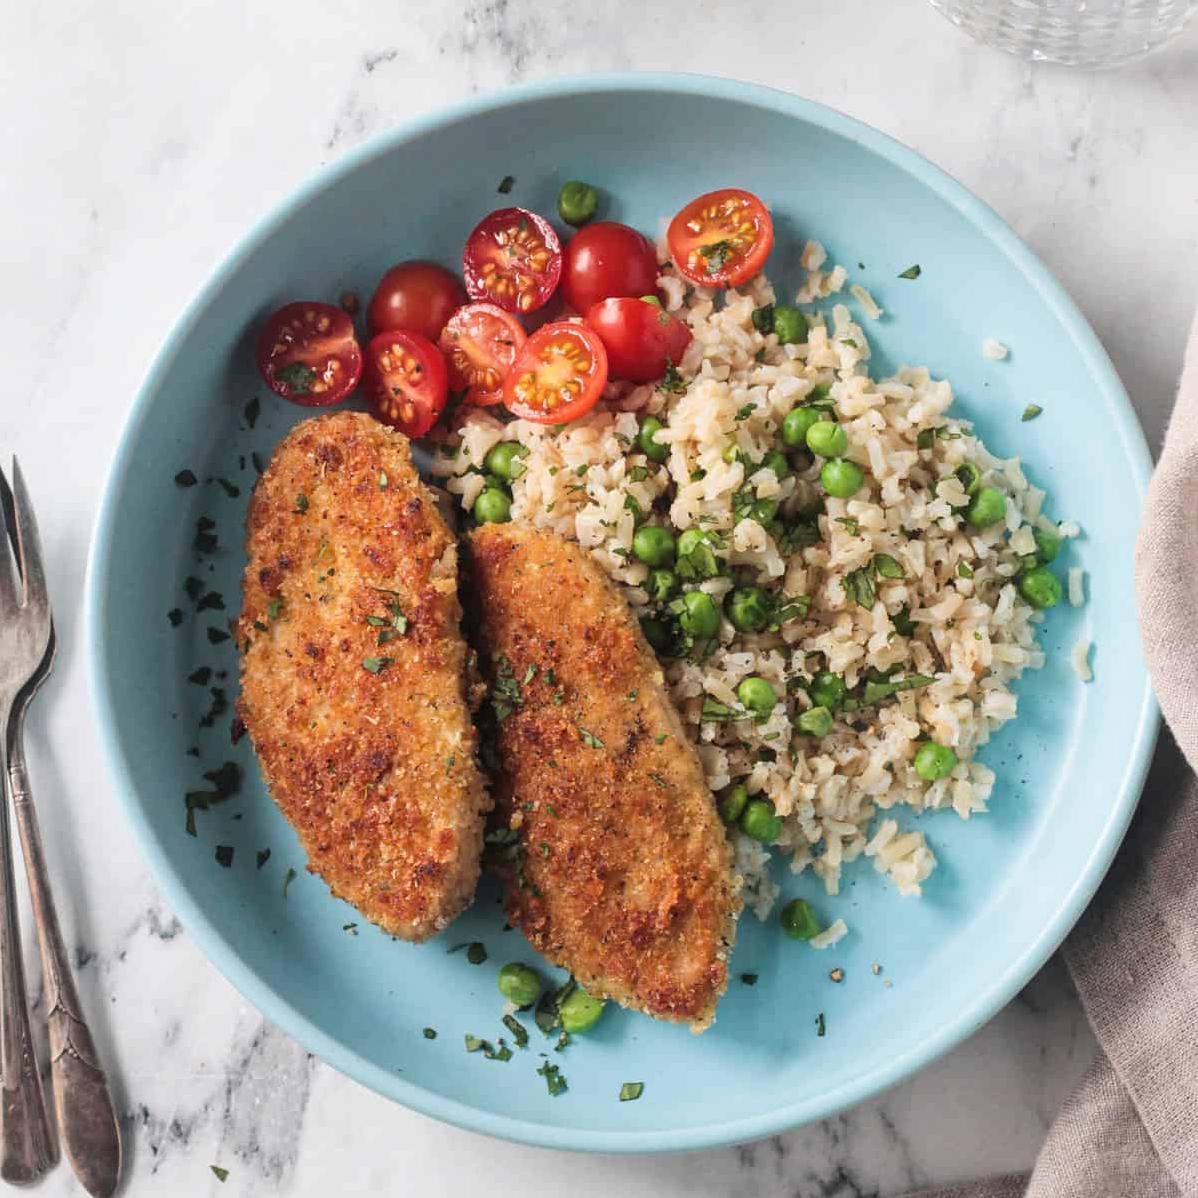  This vegan twist on a classic chicken cutlet is a must-try!